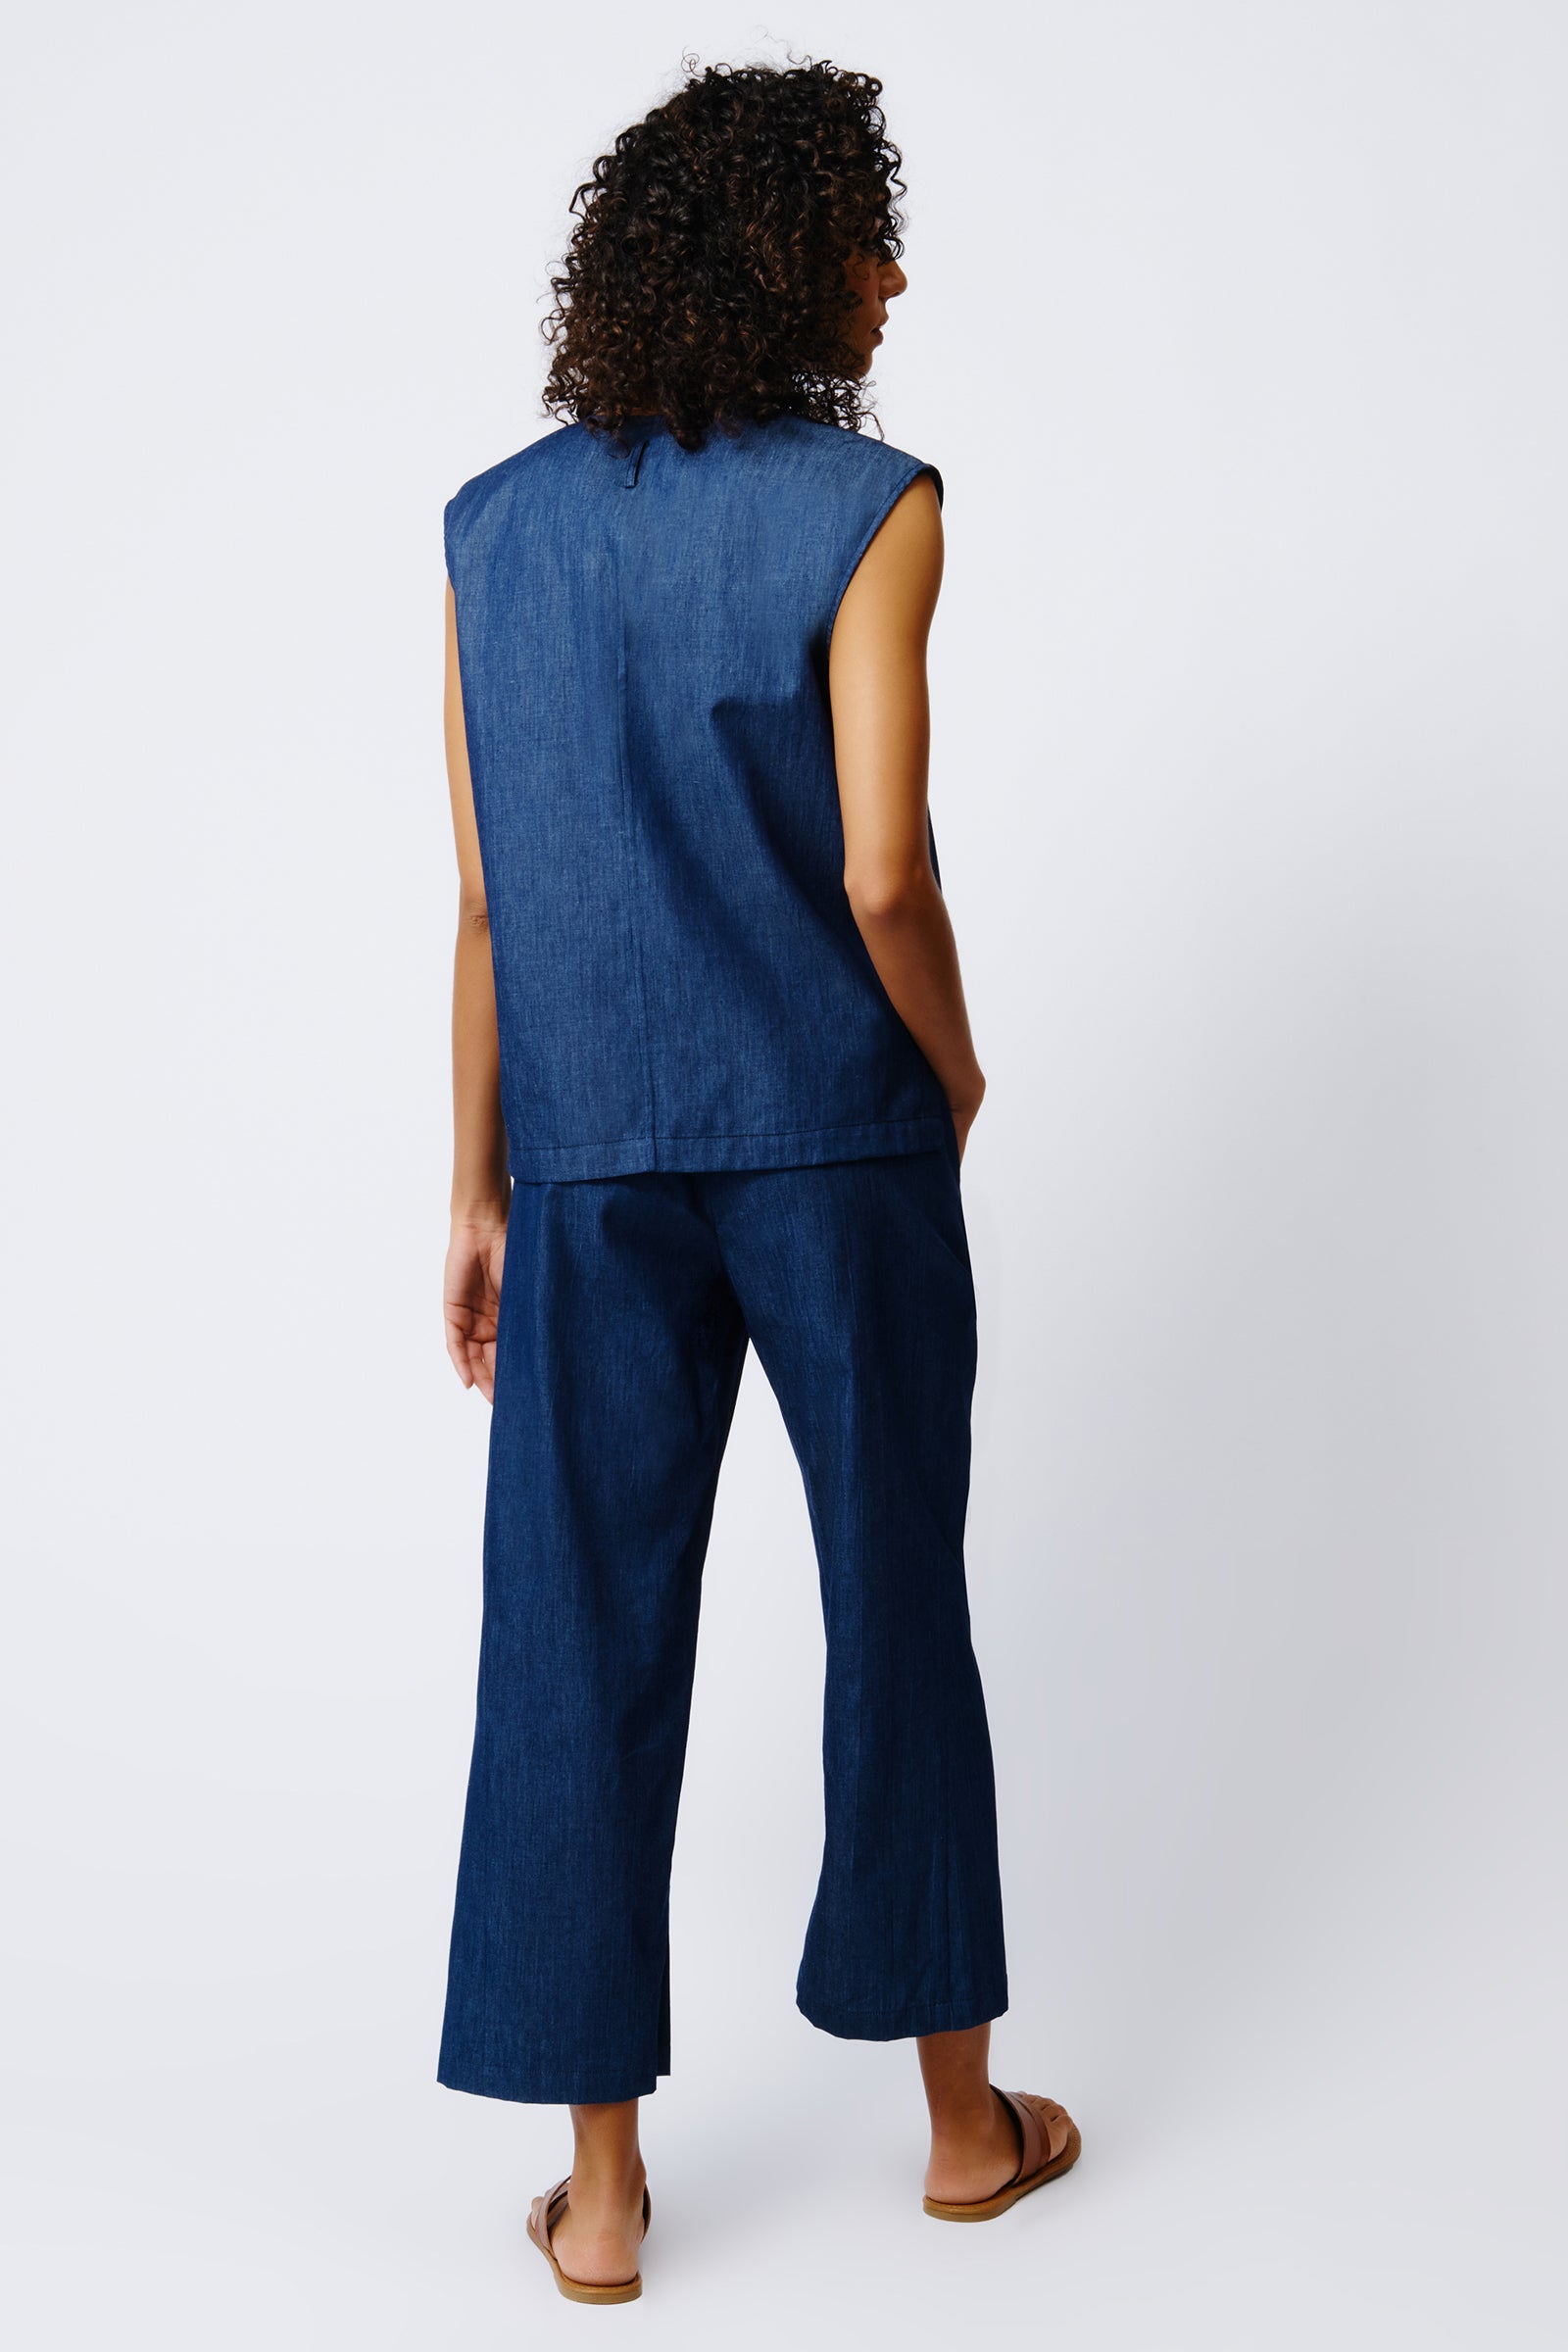 Kal Rieman Ava V Neck Shell in Classic Indigo on Model Front View Crop